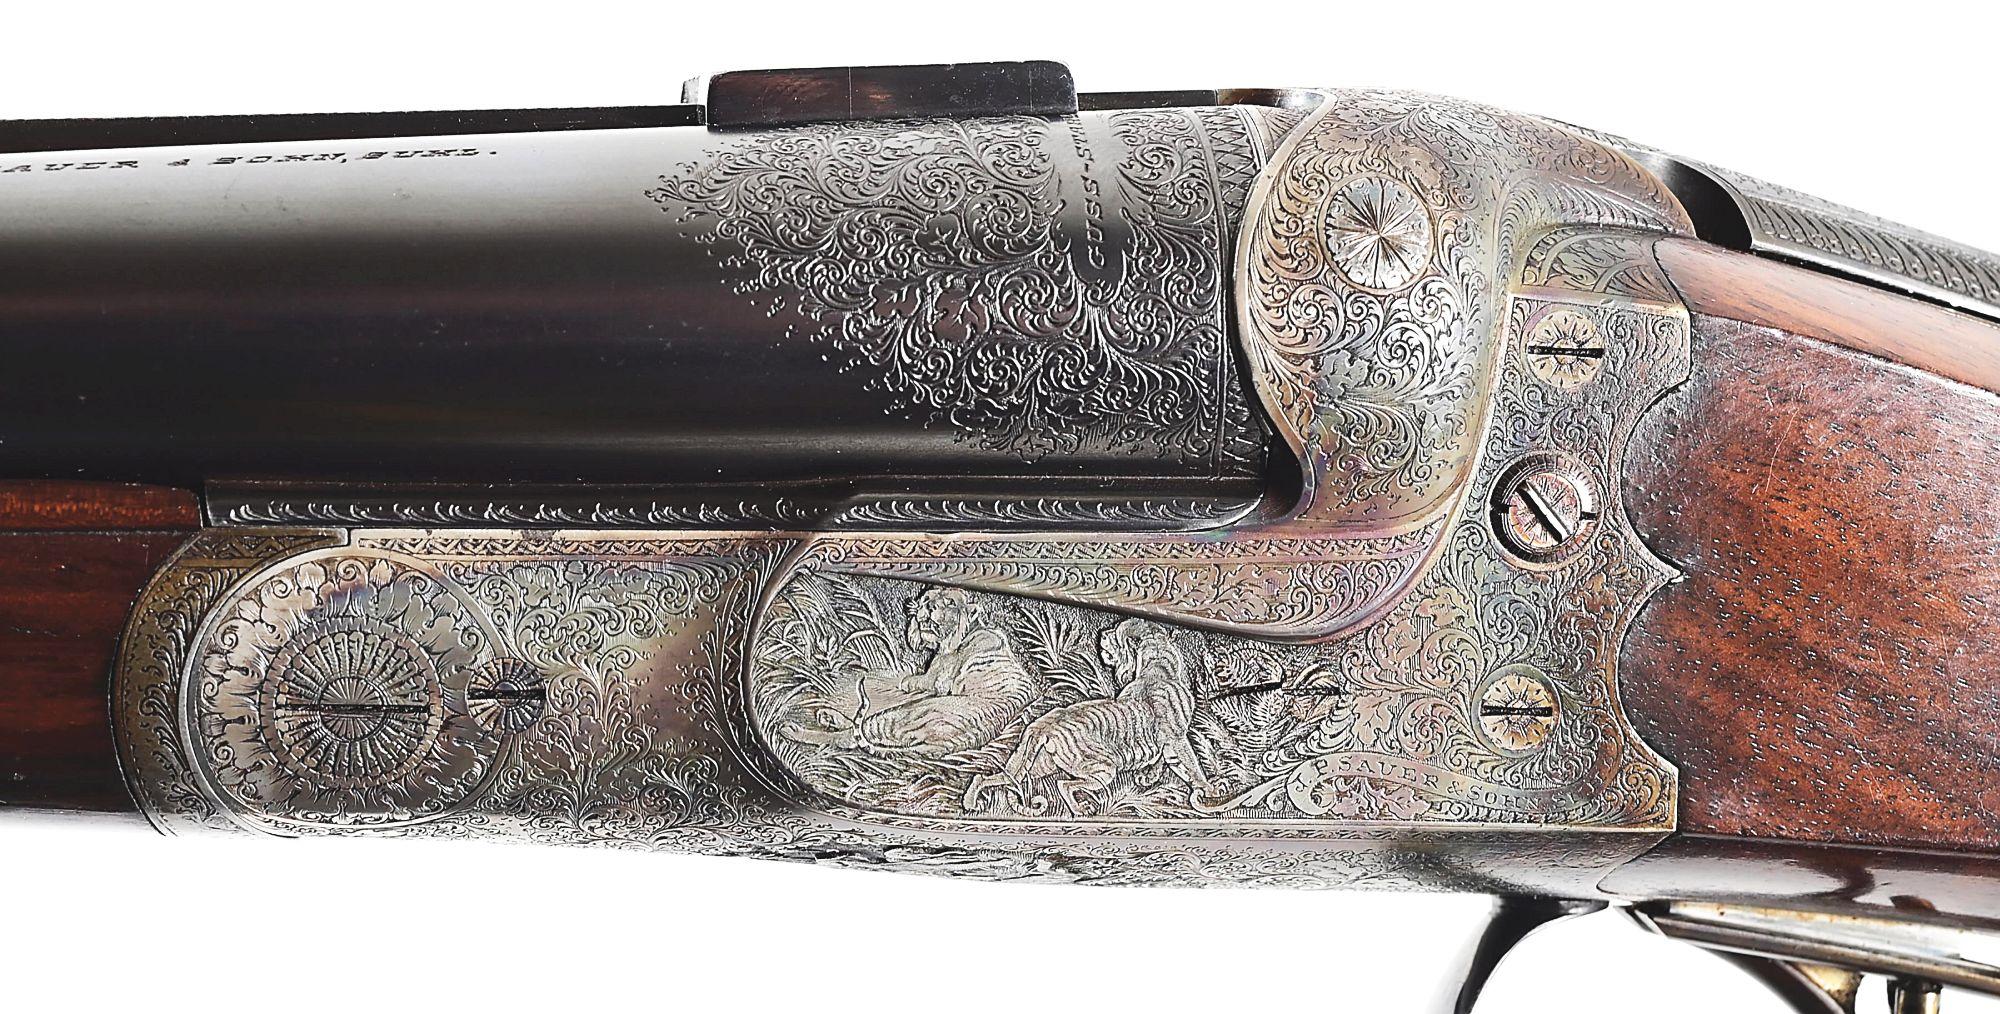 (C) J.P. SAUER 10.75X68 DOUBLE RIFLE, RETAILED BY VOELKER, BUENOS AIRES, AND ENGRAVED WITH SAFARI SC